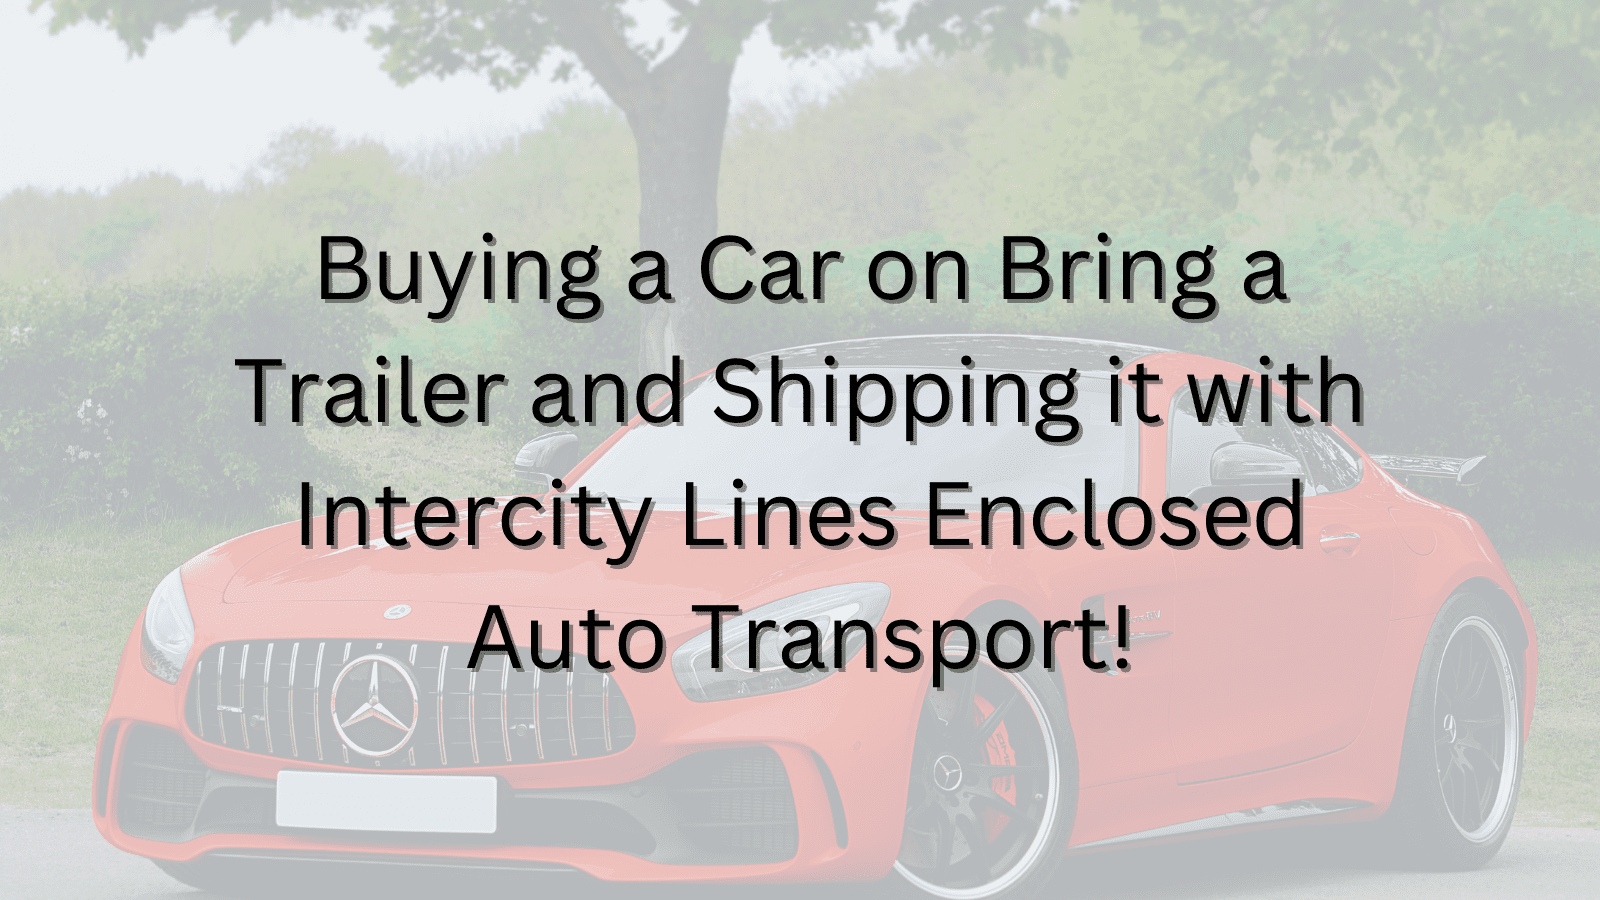 Buying a Car on Bring a Trailer and Shipping it with Intercity Lines Enclosed Auto Transport!